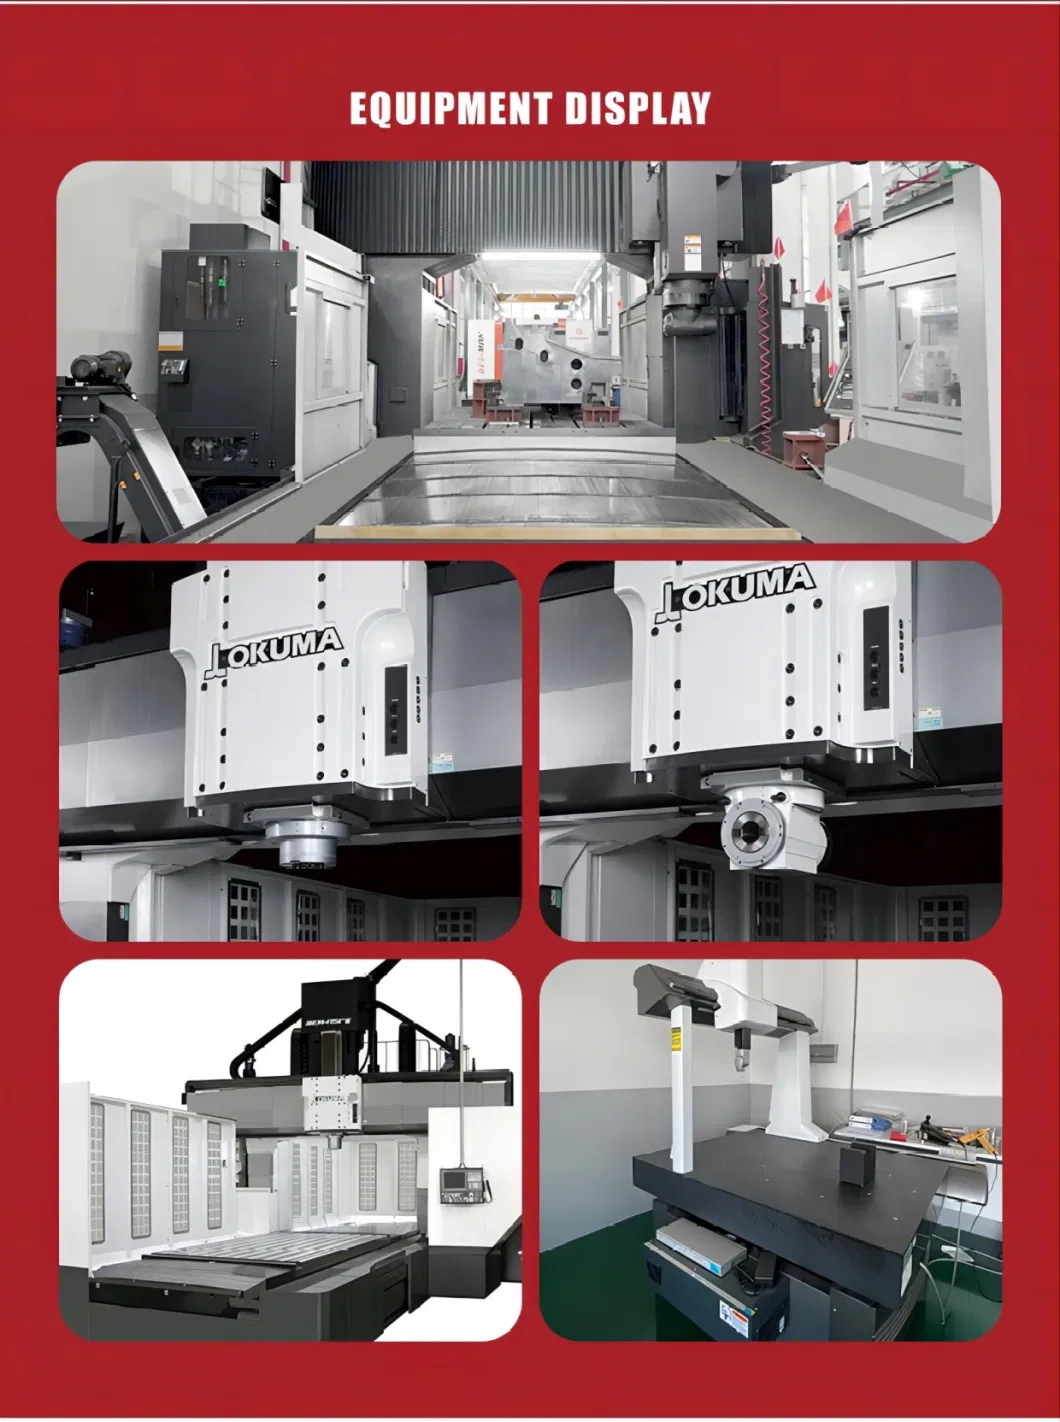 W7-8cydwi Interpolation Y-Axis Driven Tool Turret Hydraulic Tailstock CNC Slant Bed Milling Machine